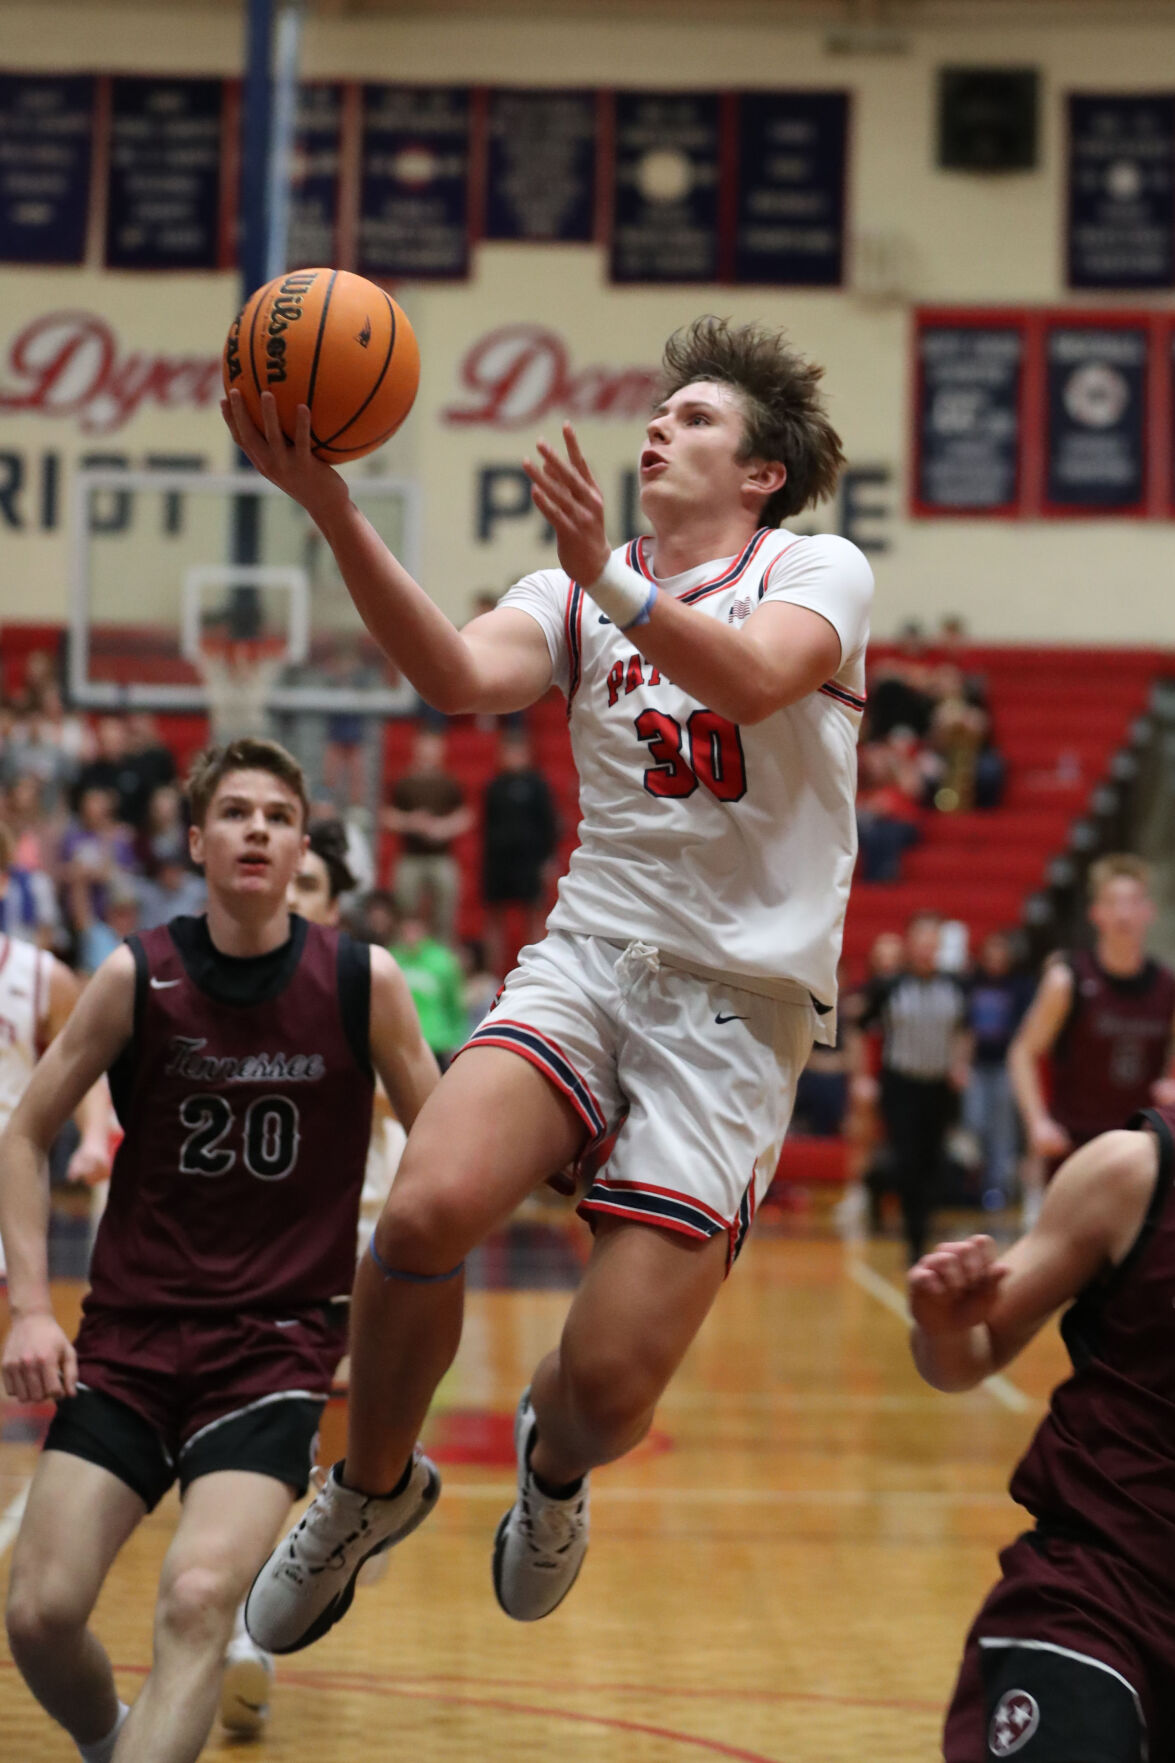 Sullivan East Prevails Over Tennessee High in Thrilling Boys Basketball Match